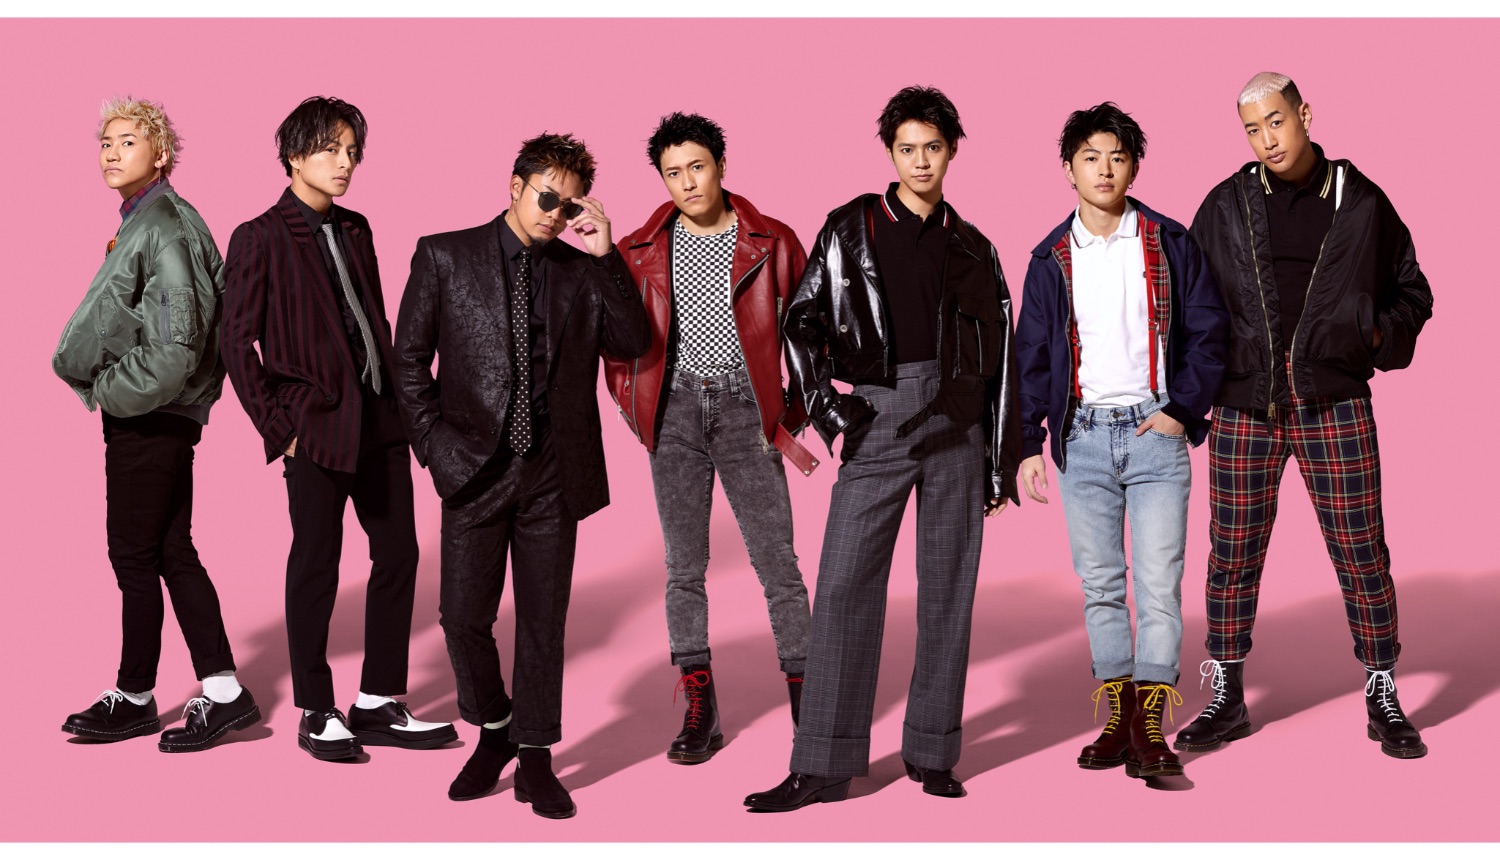 GENERATIONS from EXILE TRIBE ジェネレーションズ・フロム・エグザイル・トライブ 放浪新世代 from 放浪一族-2